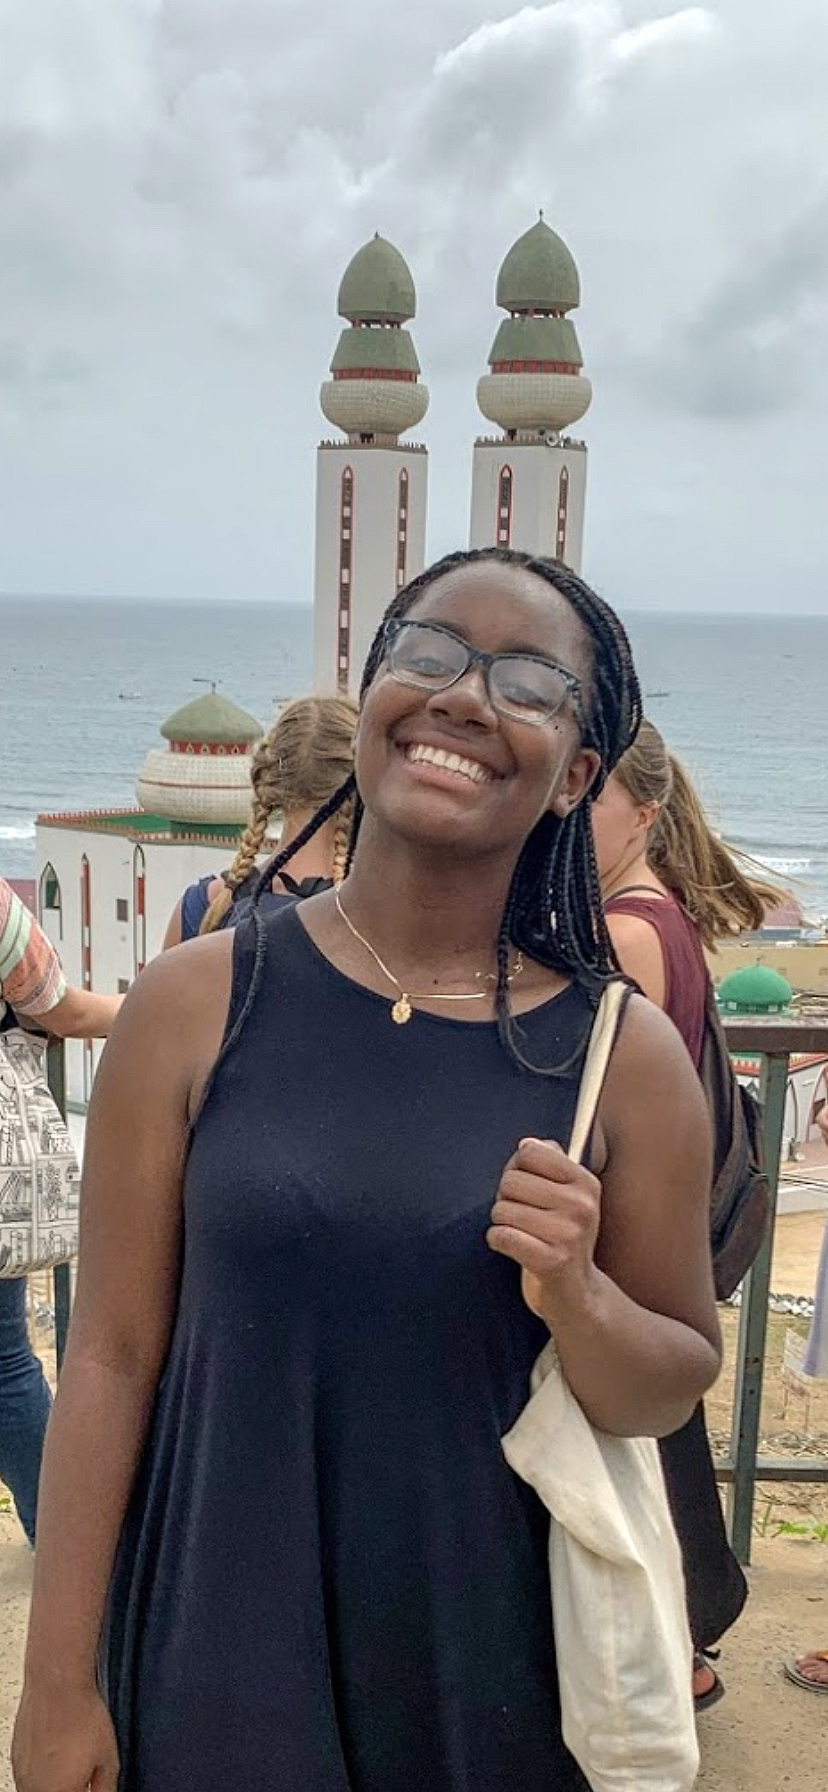 Nakeeya Garland smiling with ocean view in background